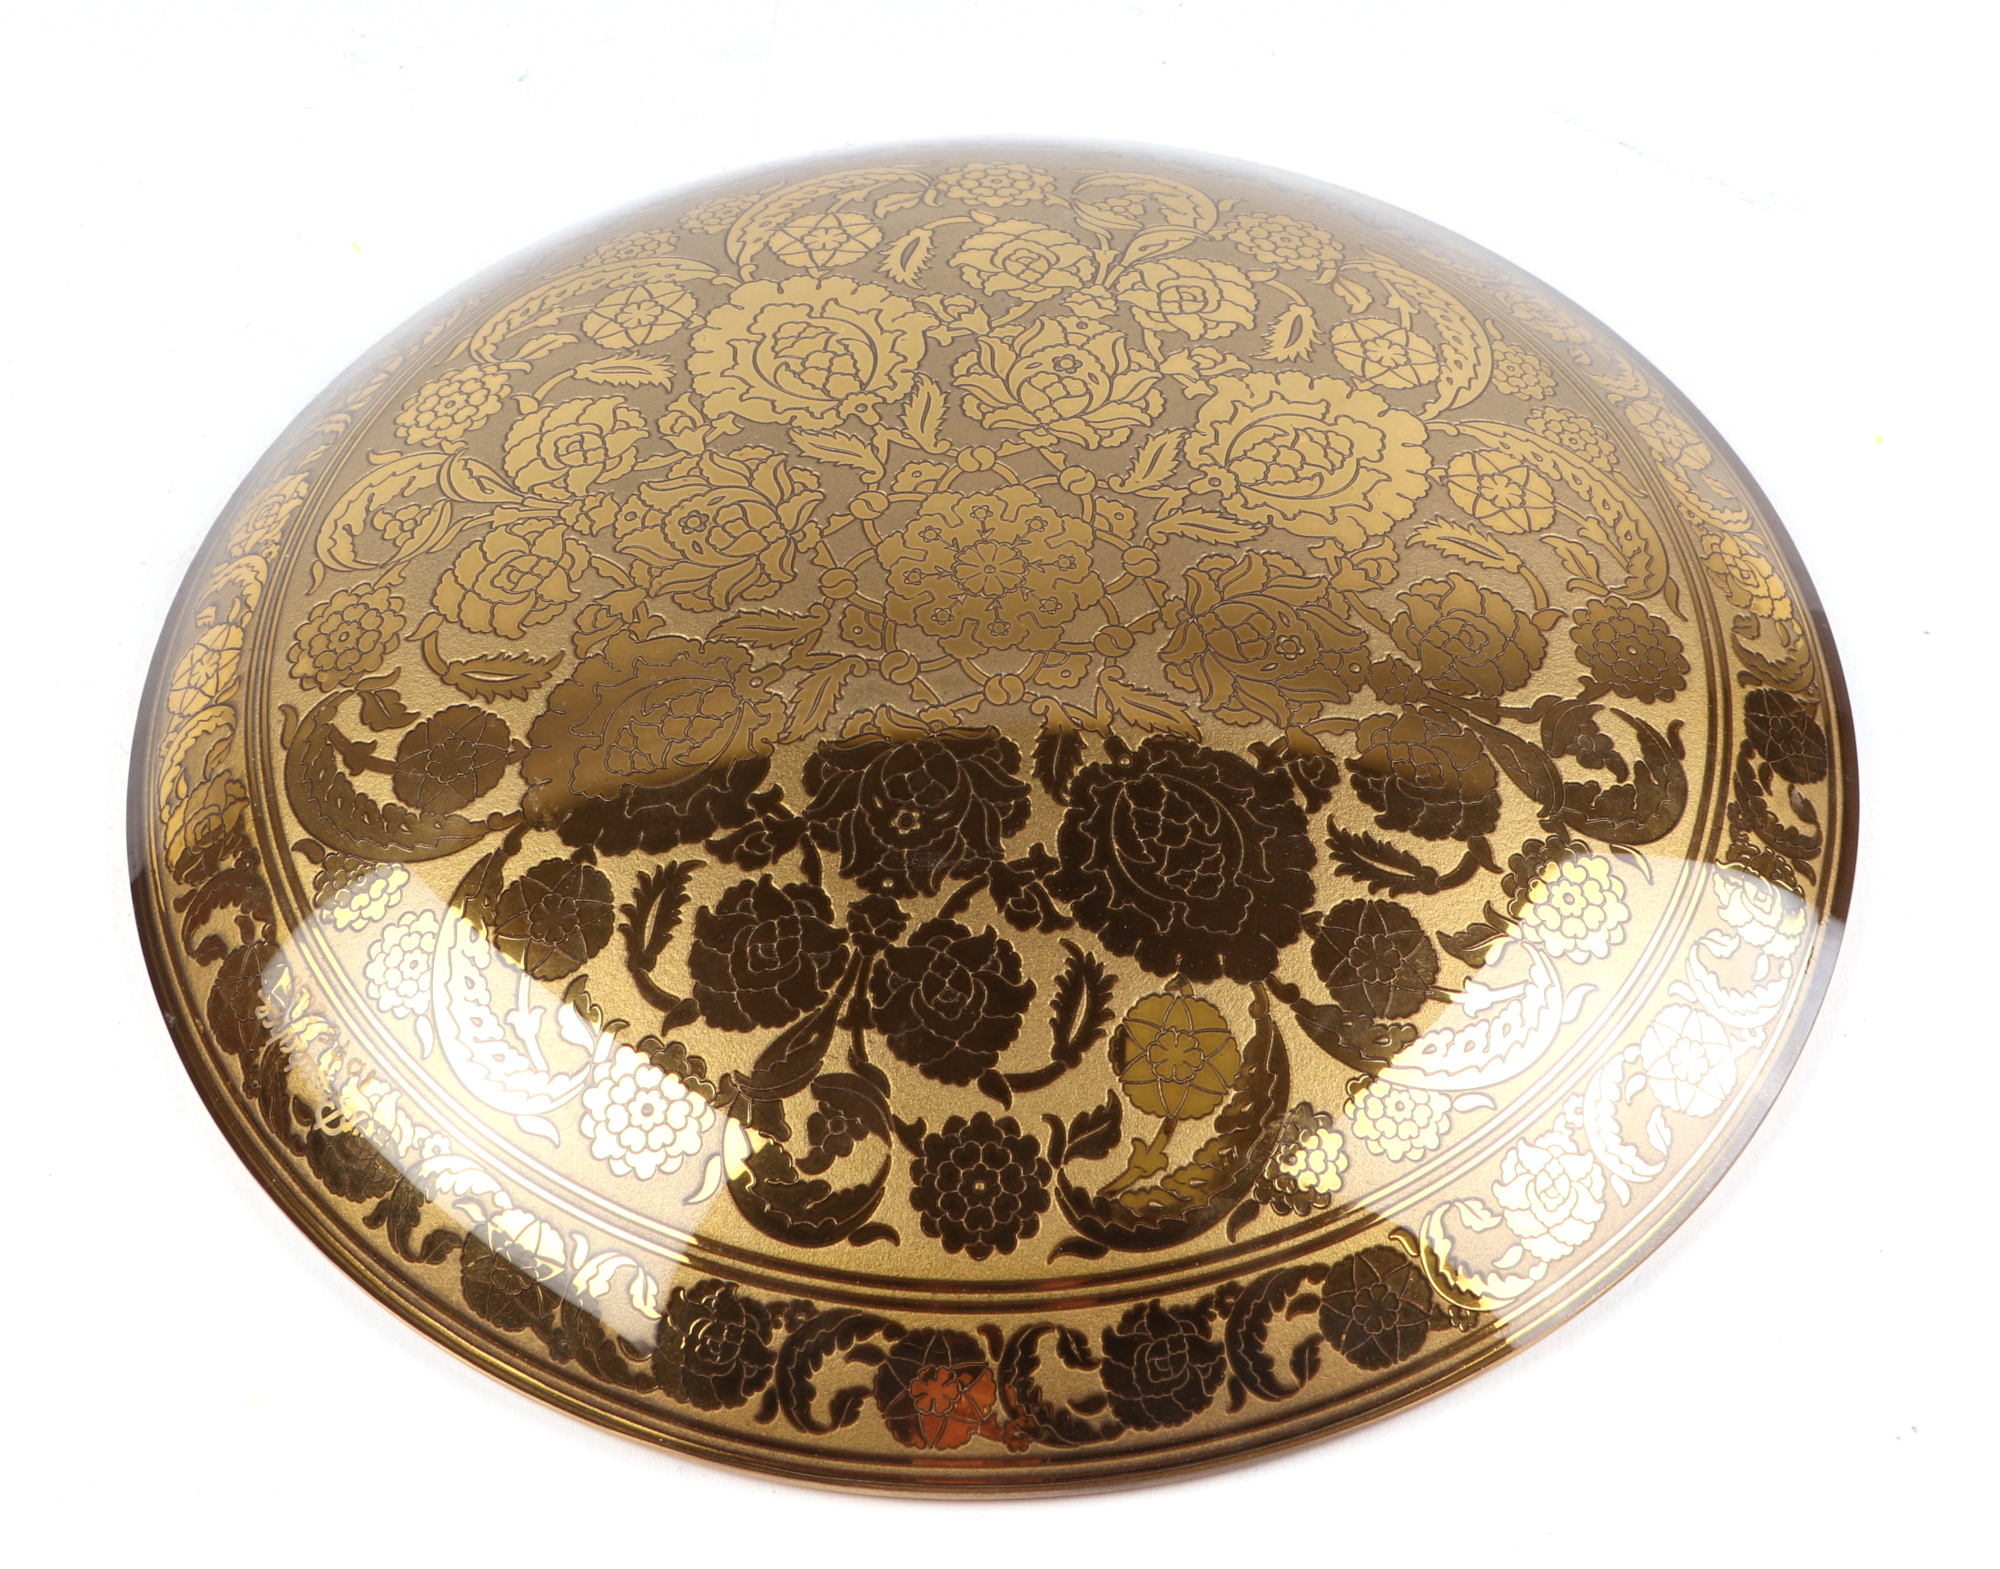 An Osmanli collection limited edition Orge plate/bowl, 1095/2000, boxed, 23cm diameter. - Image 2 of 3